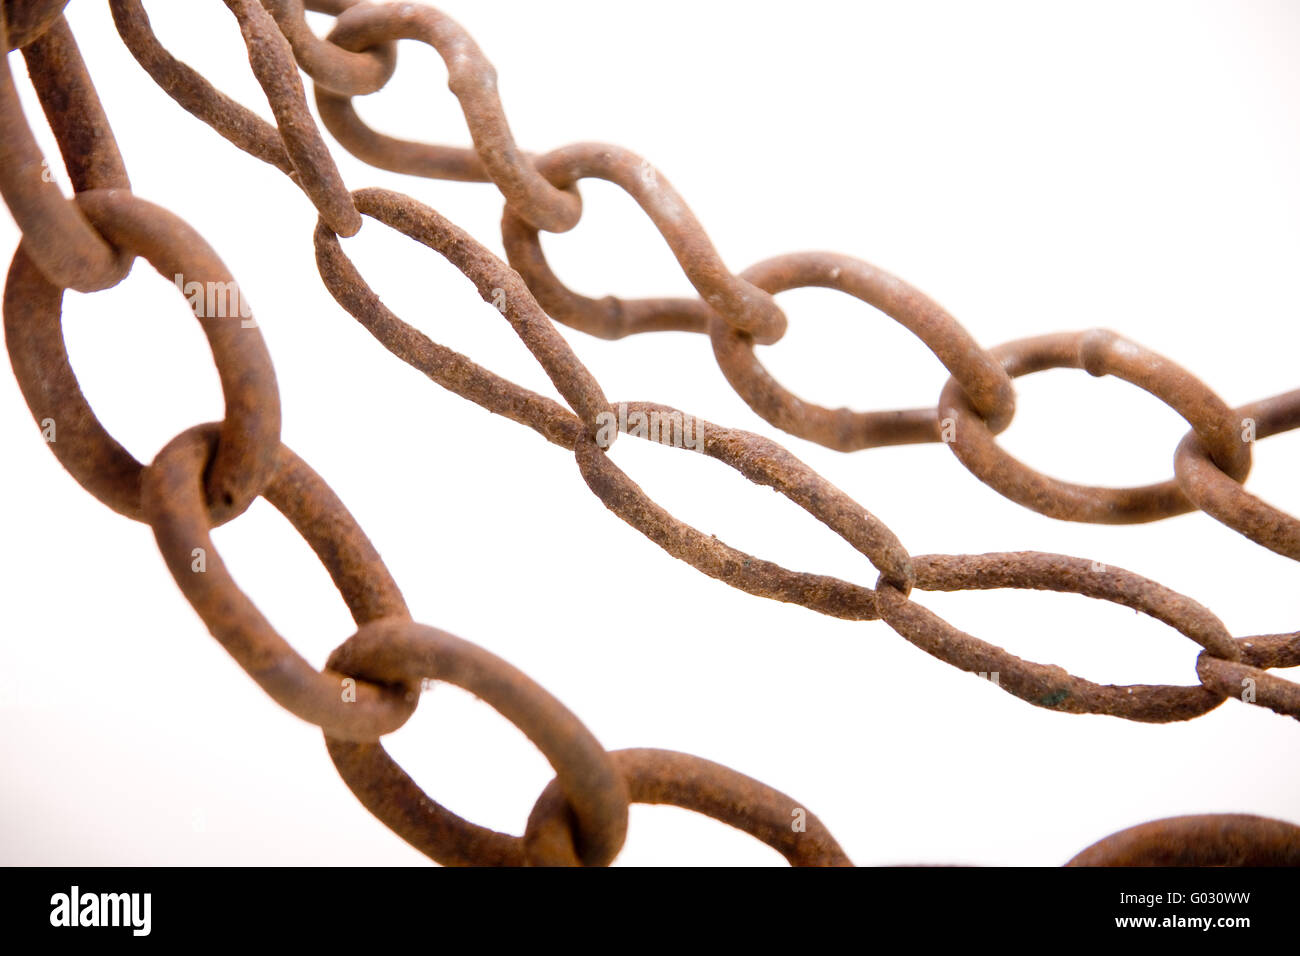 Rusty chains Stock Photo